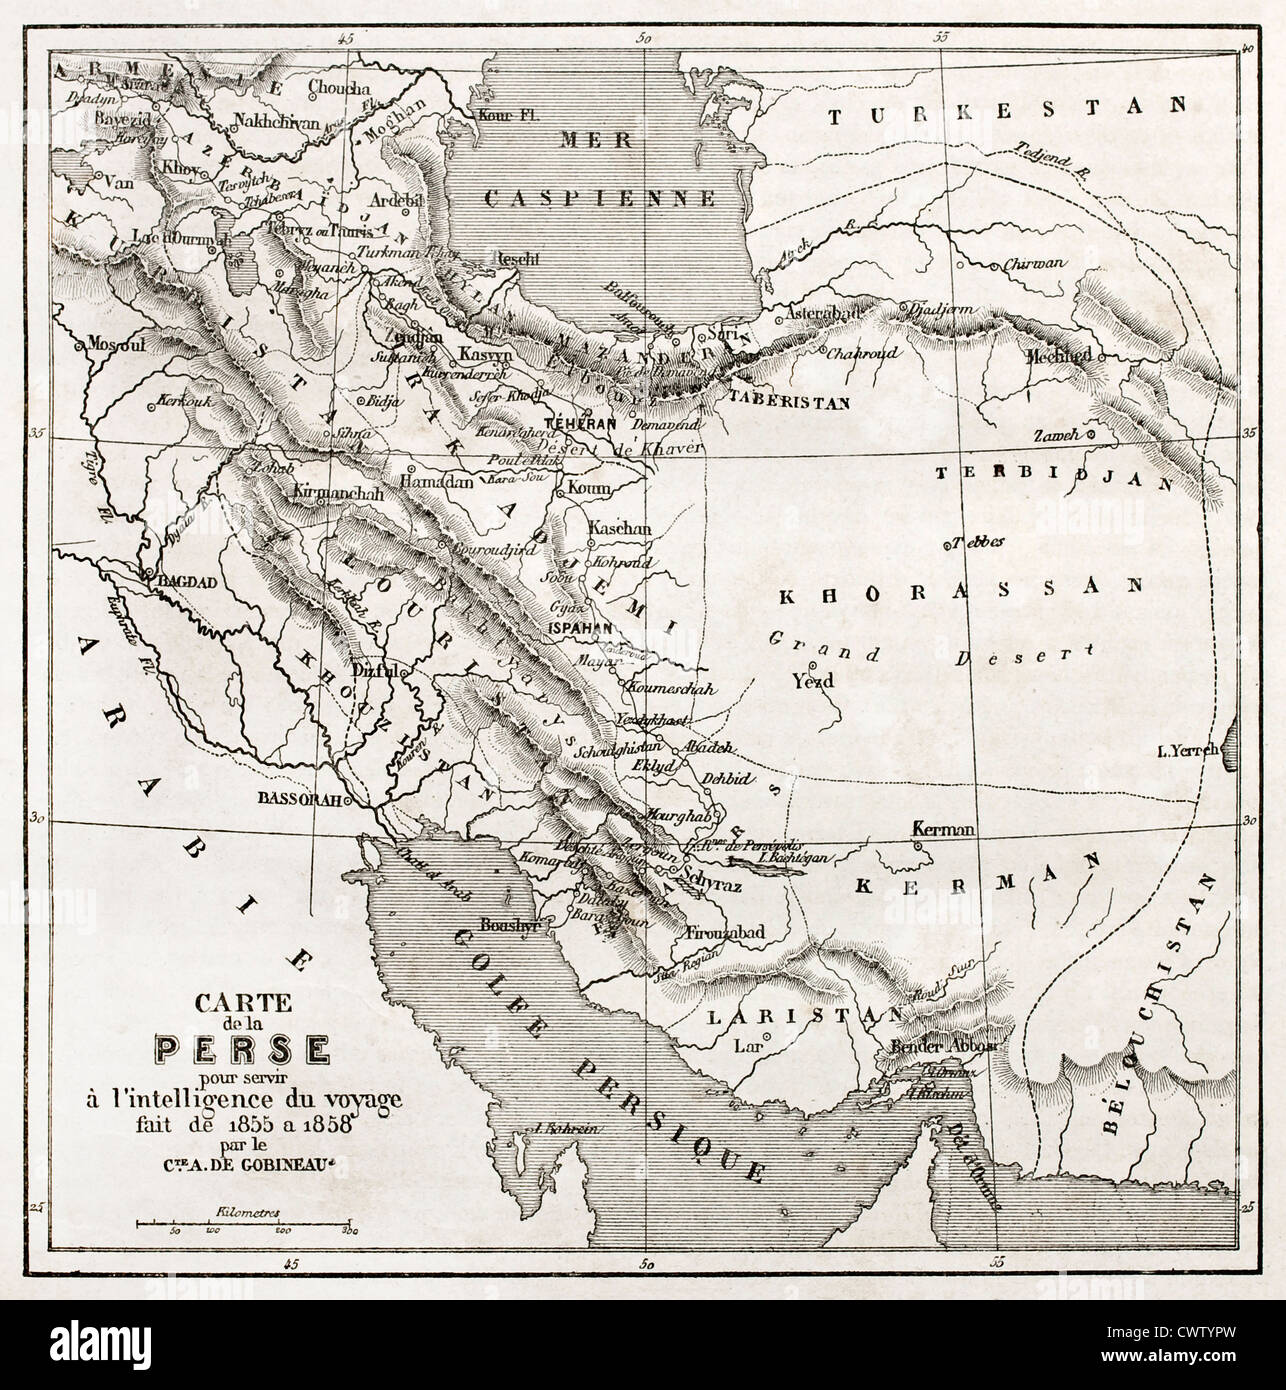 Persia old map Stock Photo